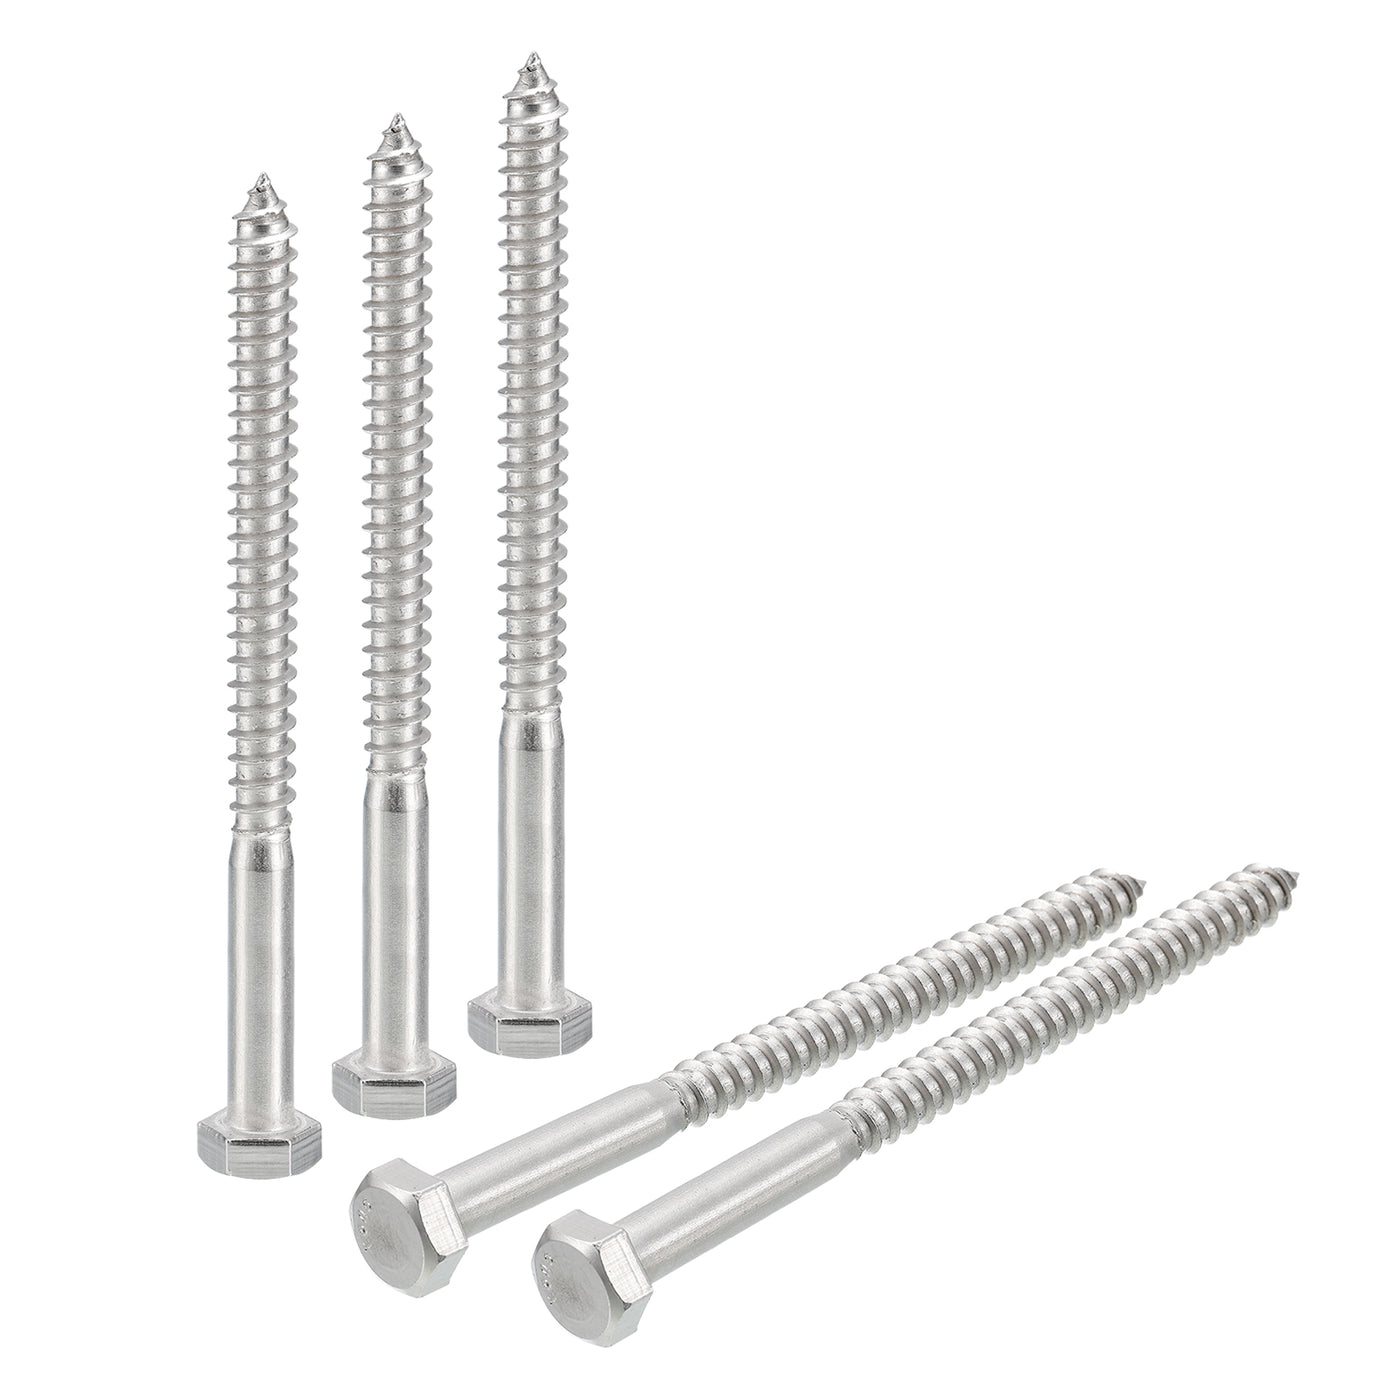 uxcell Uxcell Hex Head Lag Screws Bolts, 10pcs 5/16" x 4" 304 Stainless Steel Wood Screws